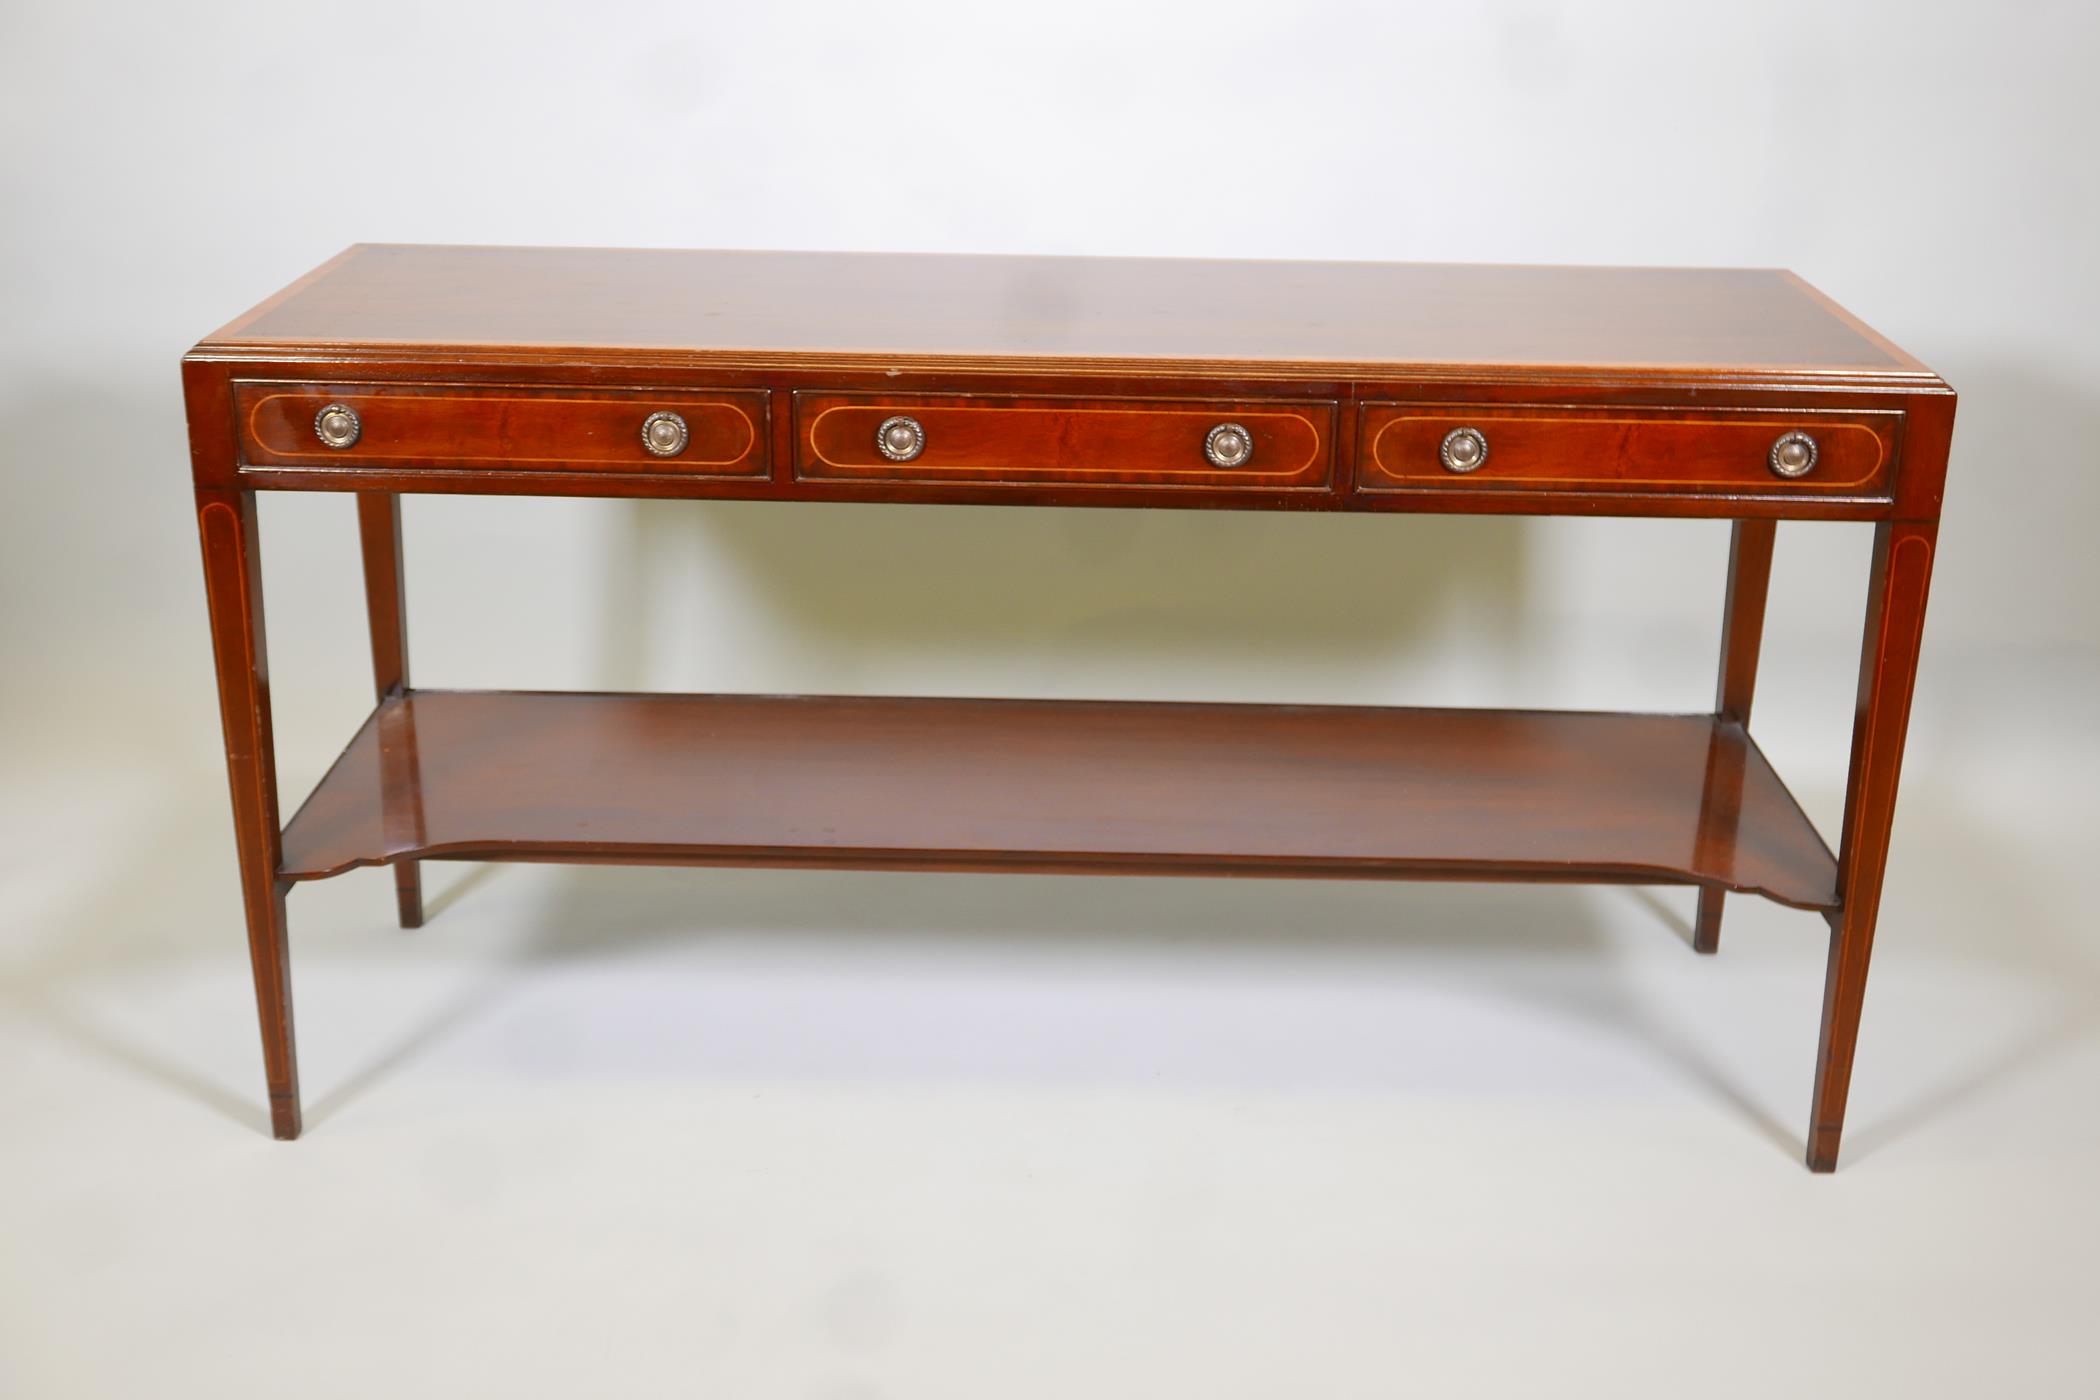 Georgian style mahogany side table/buffet with burr walnut crossbanded top over three drawers and